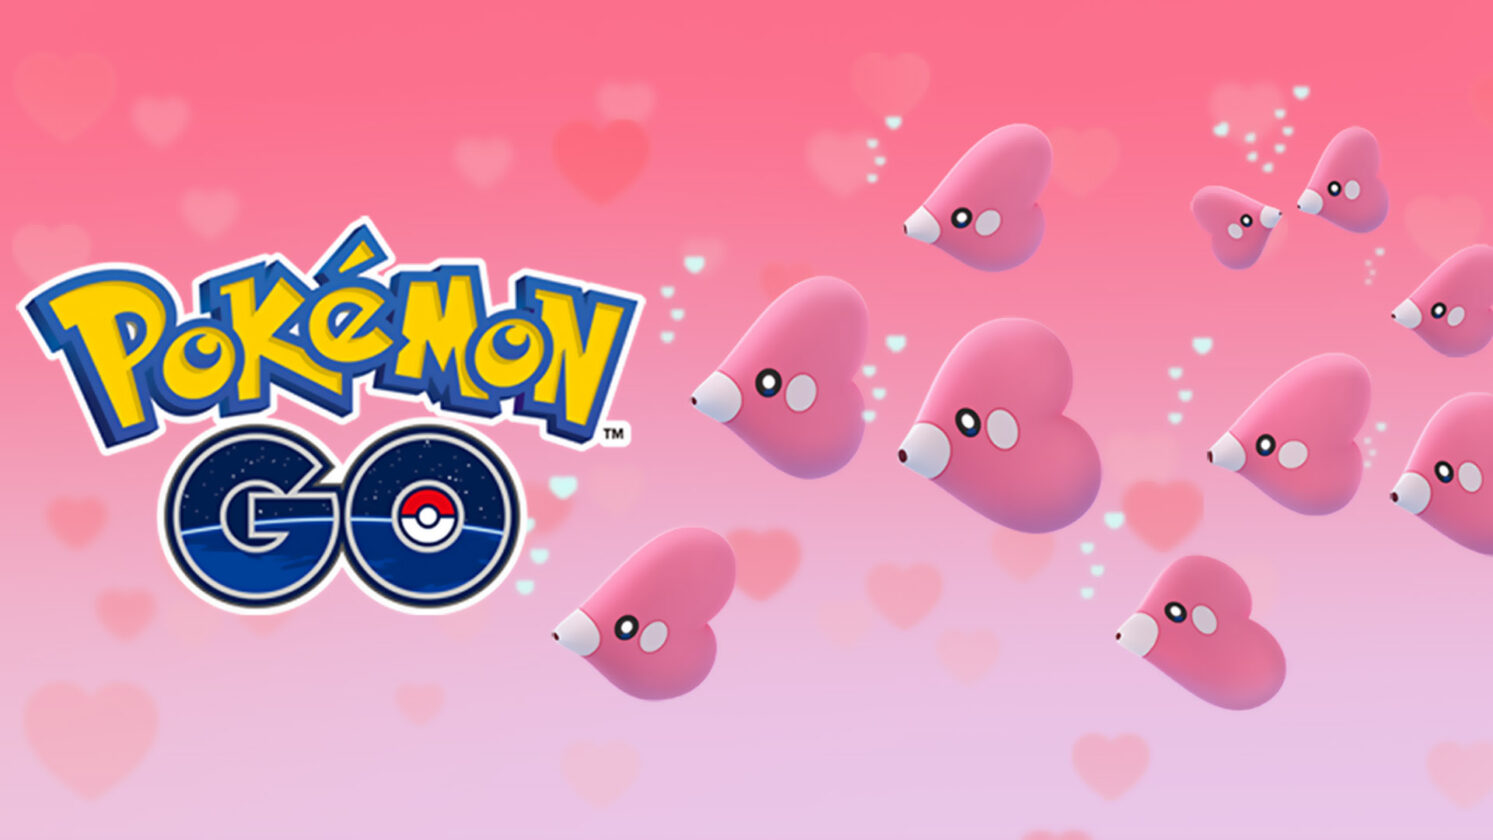 Pokemon GO Valentine’s Event to Feature Luvdisc, Chansey, and More